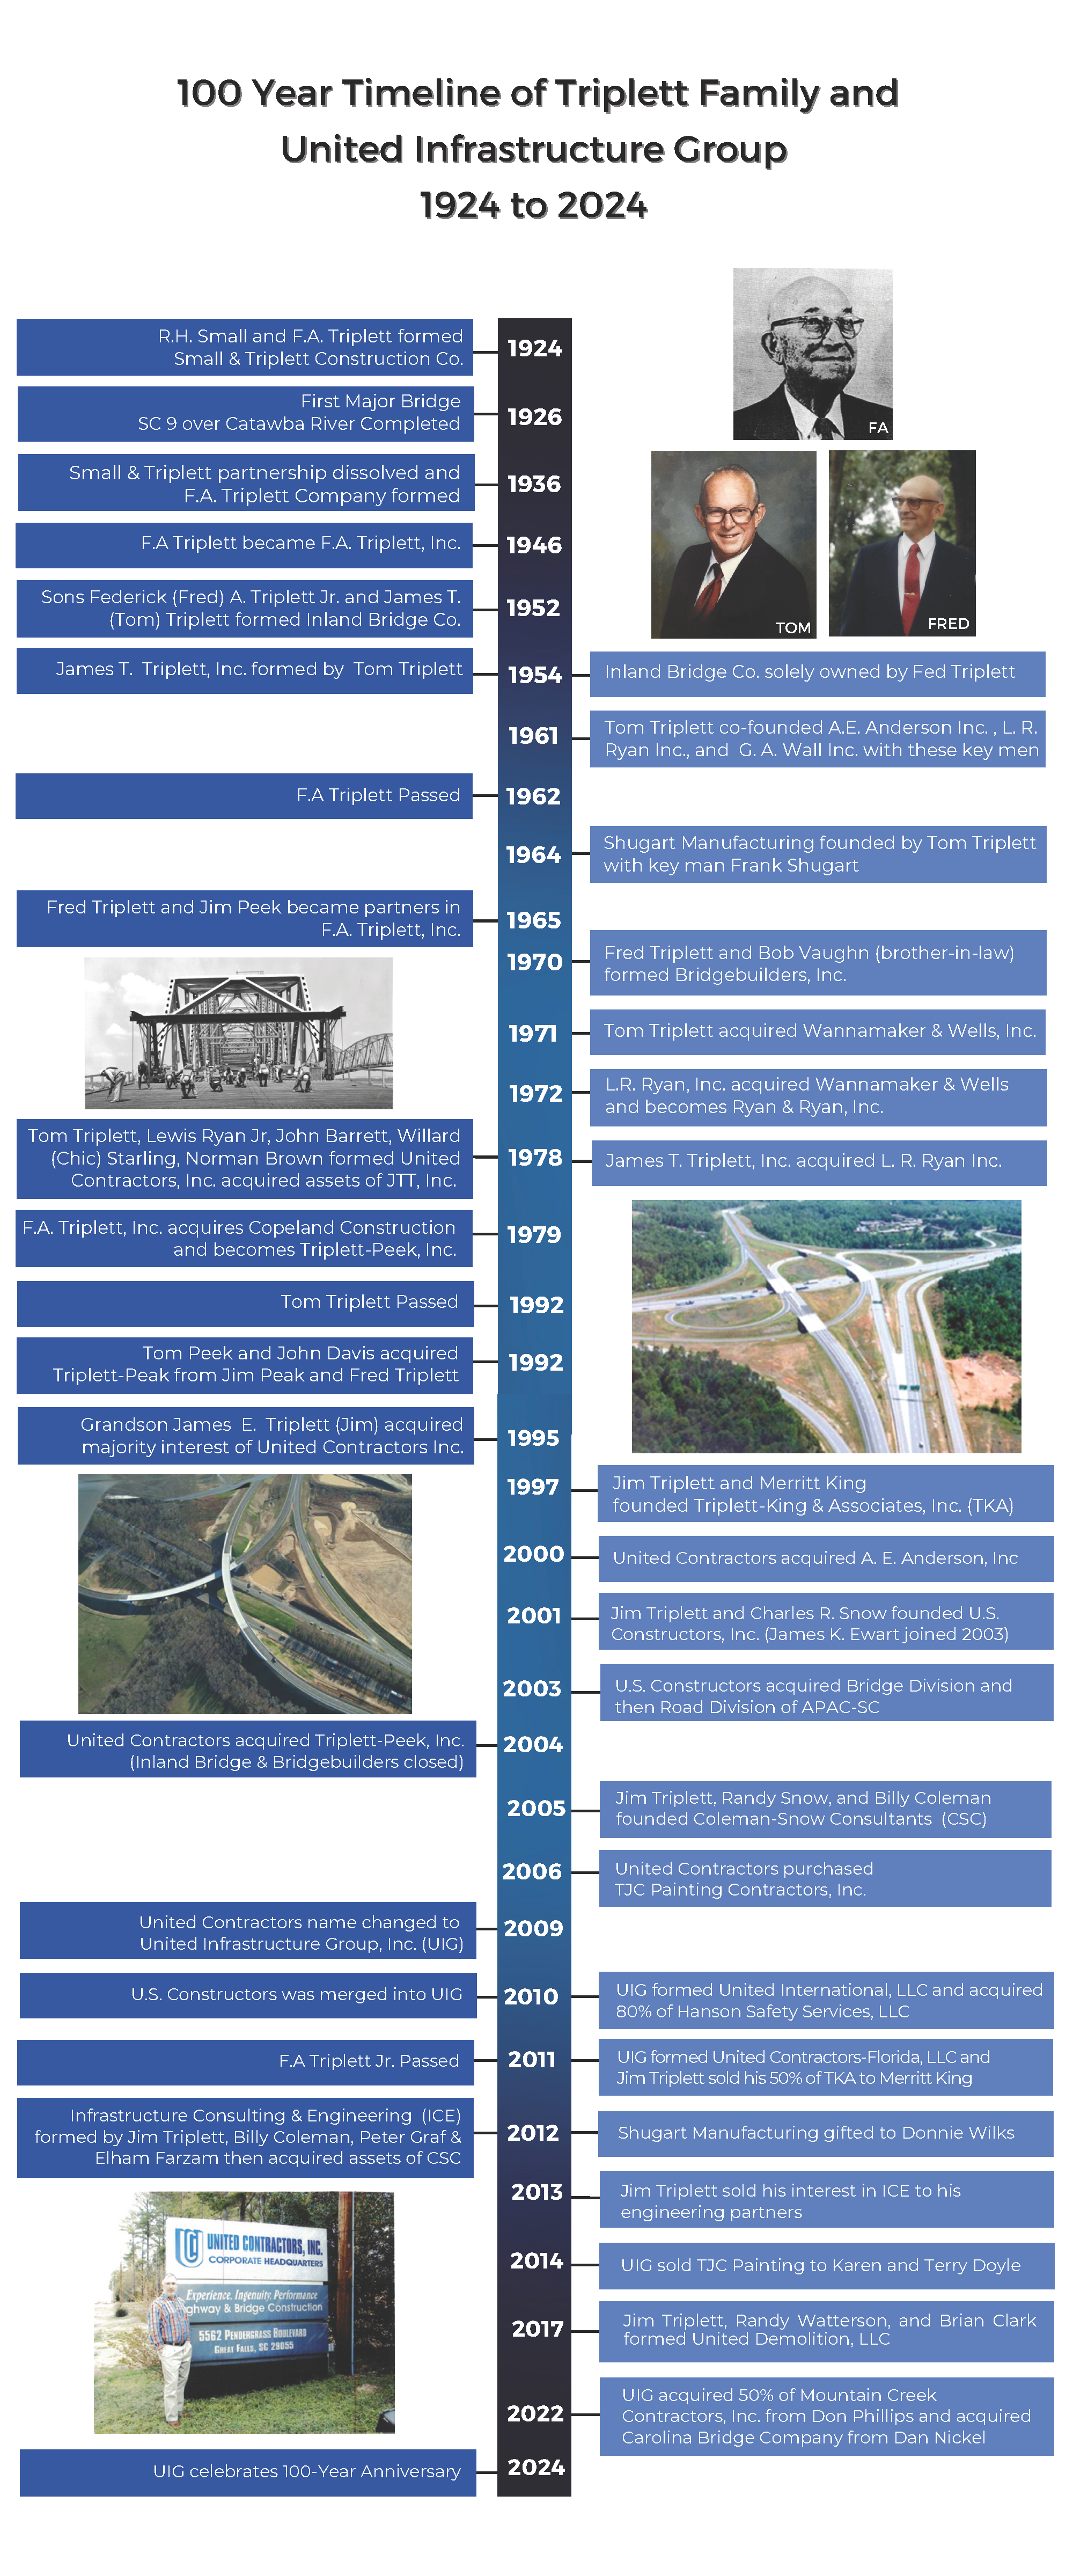 United Infrastructure Group 100 Year Timeline 3